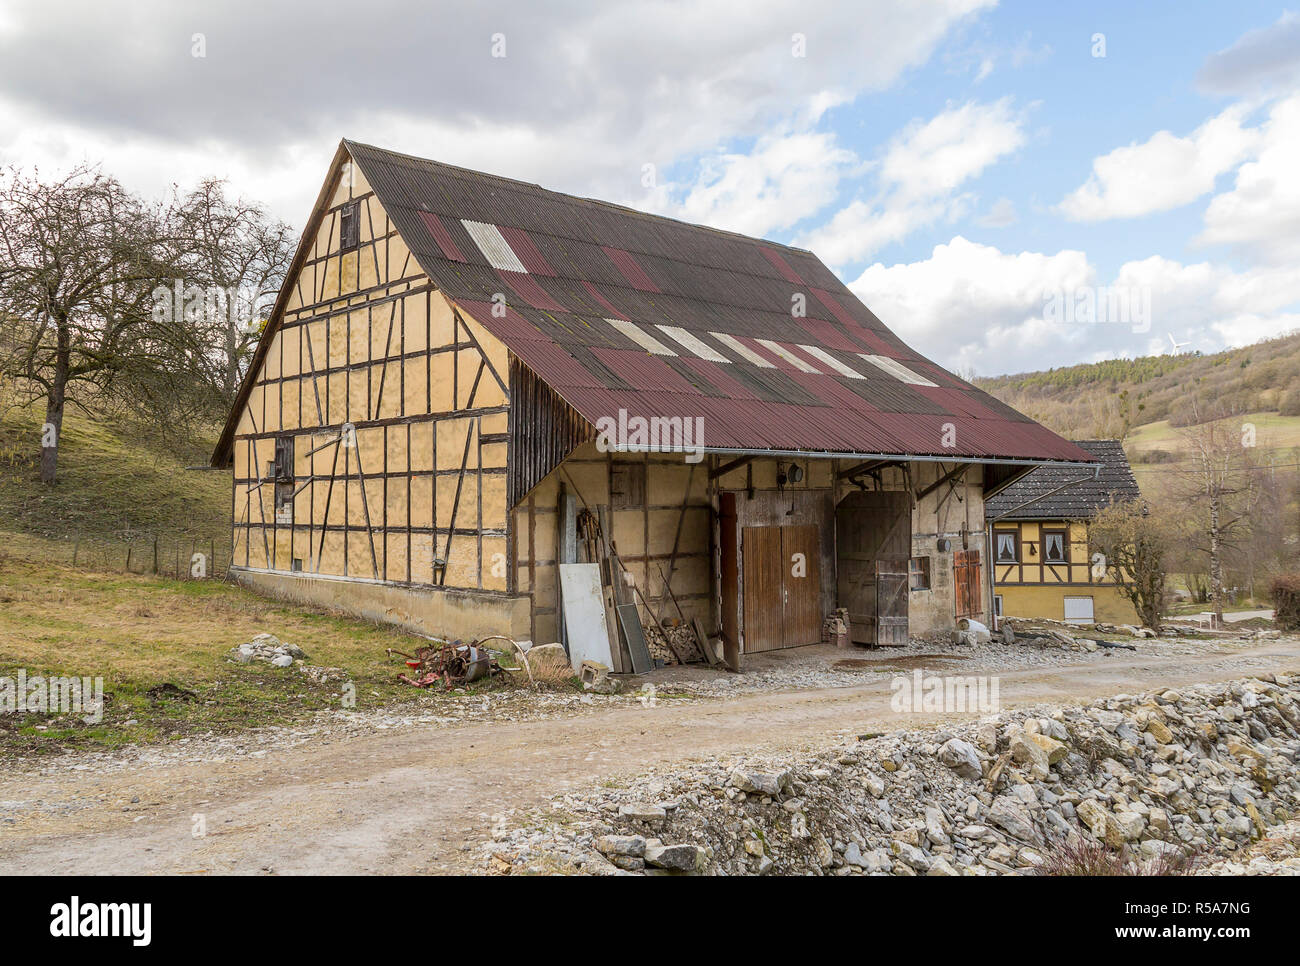 barn in southern germany Stock Photo